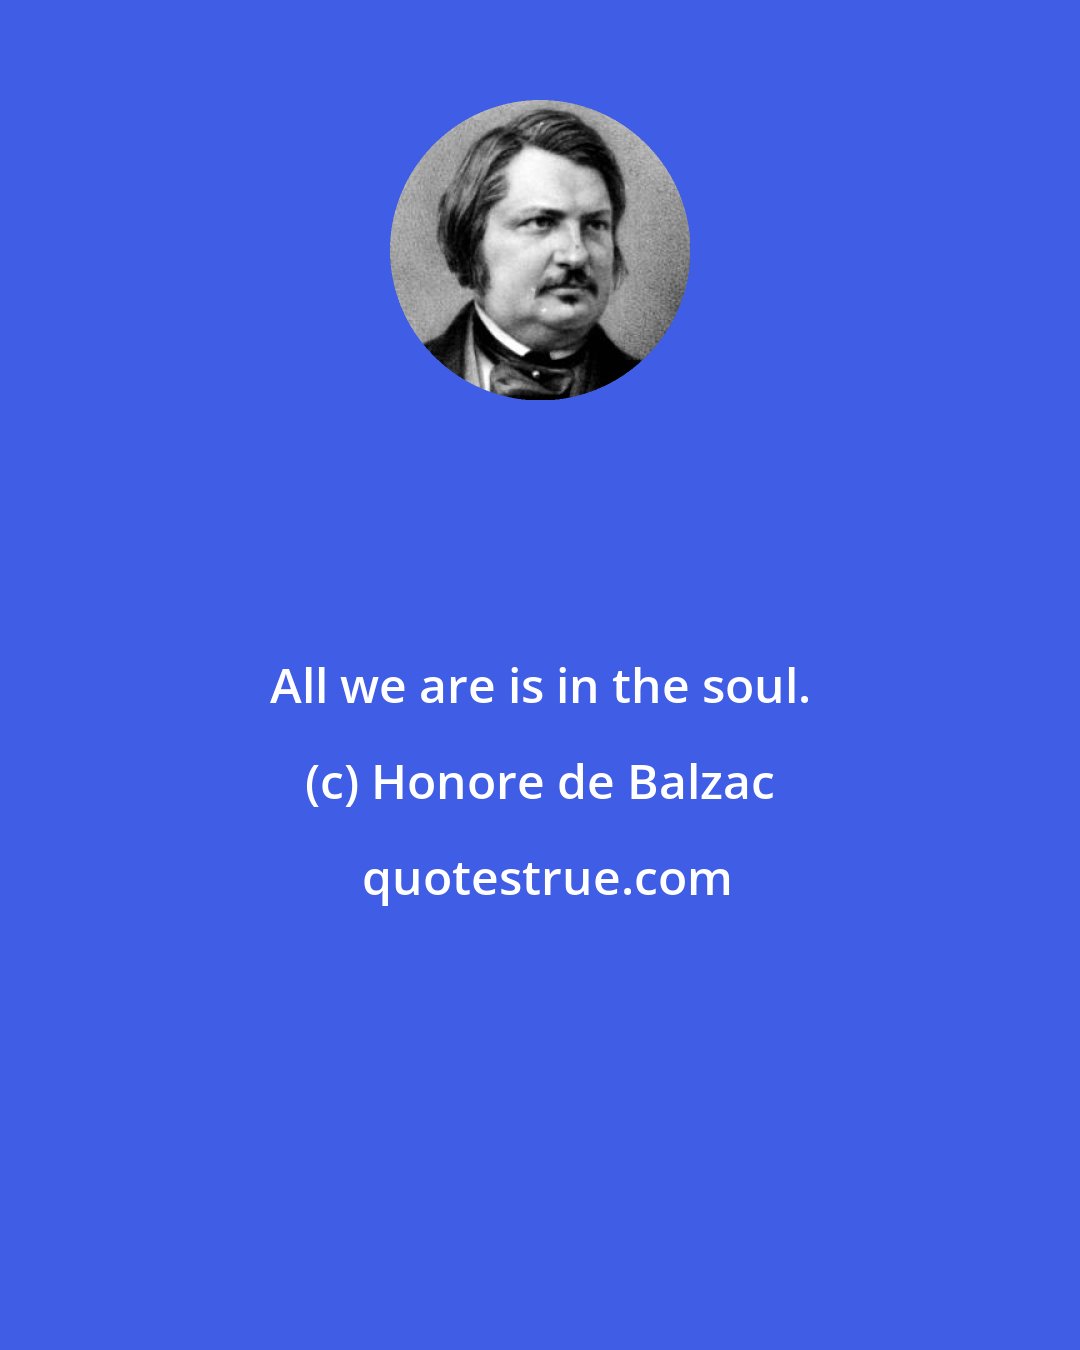 Honore de Balzac: All we are is in the soul.